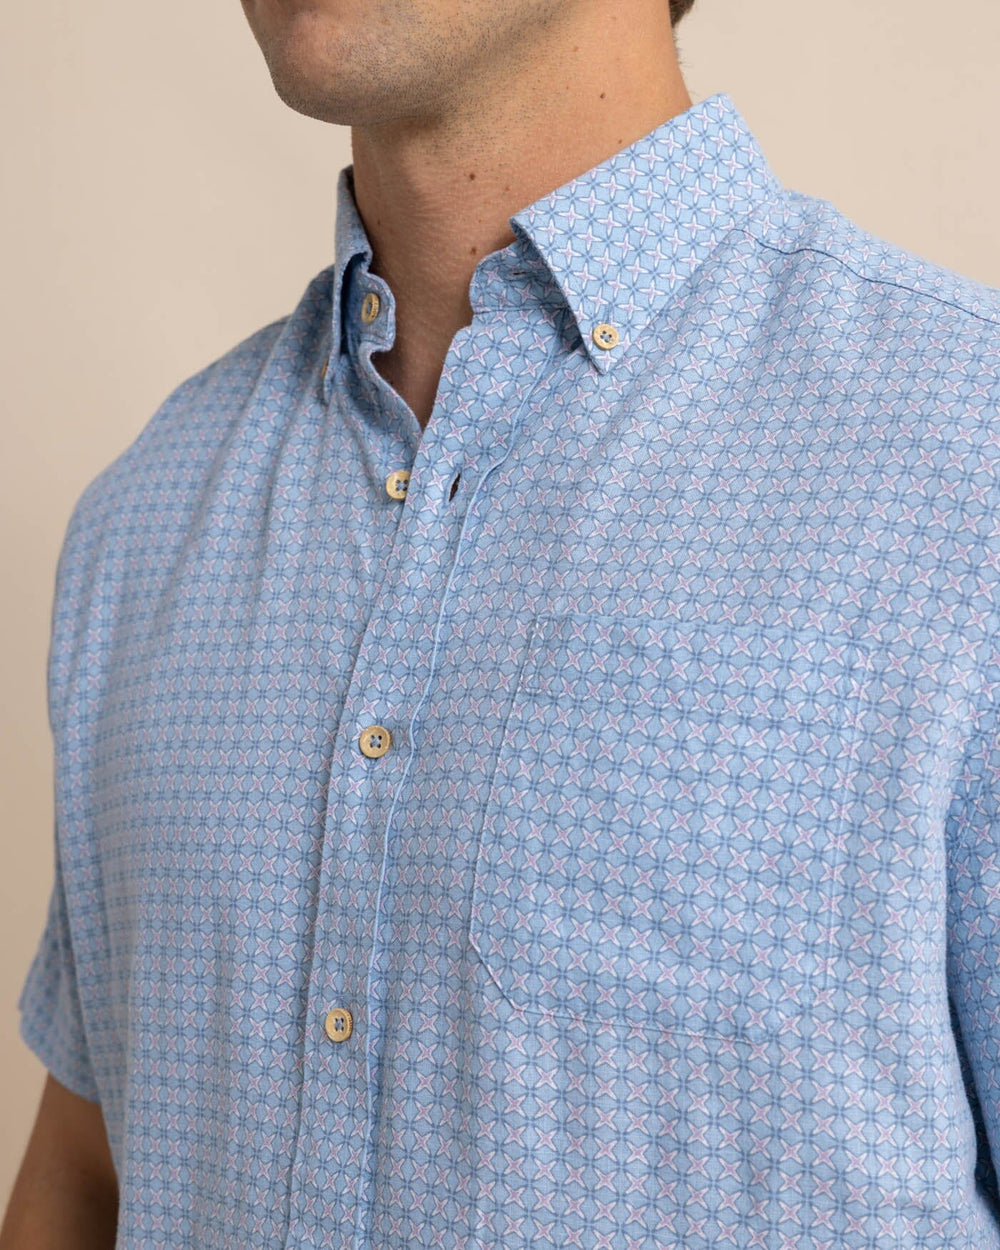 The detail view of the Southern Tide Linen Rayon White Lotus Short Sleeve Sport Shirt by Southern Tide - Clearwater Blue